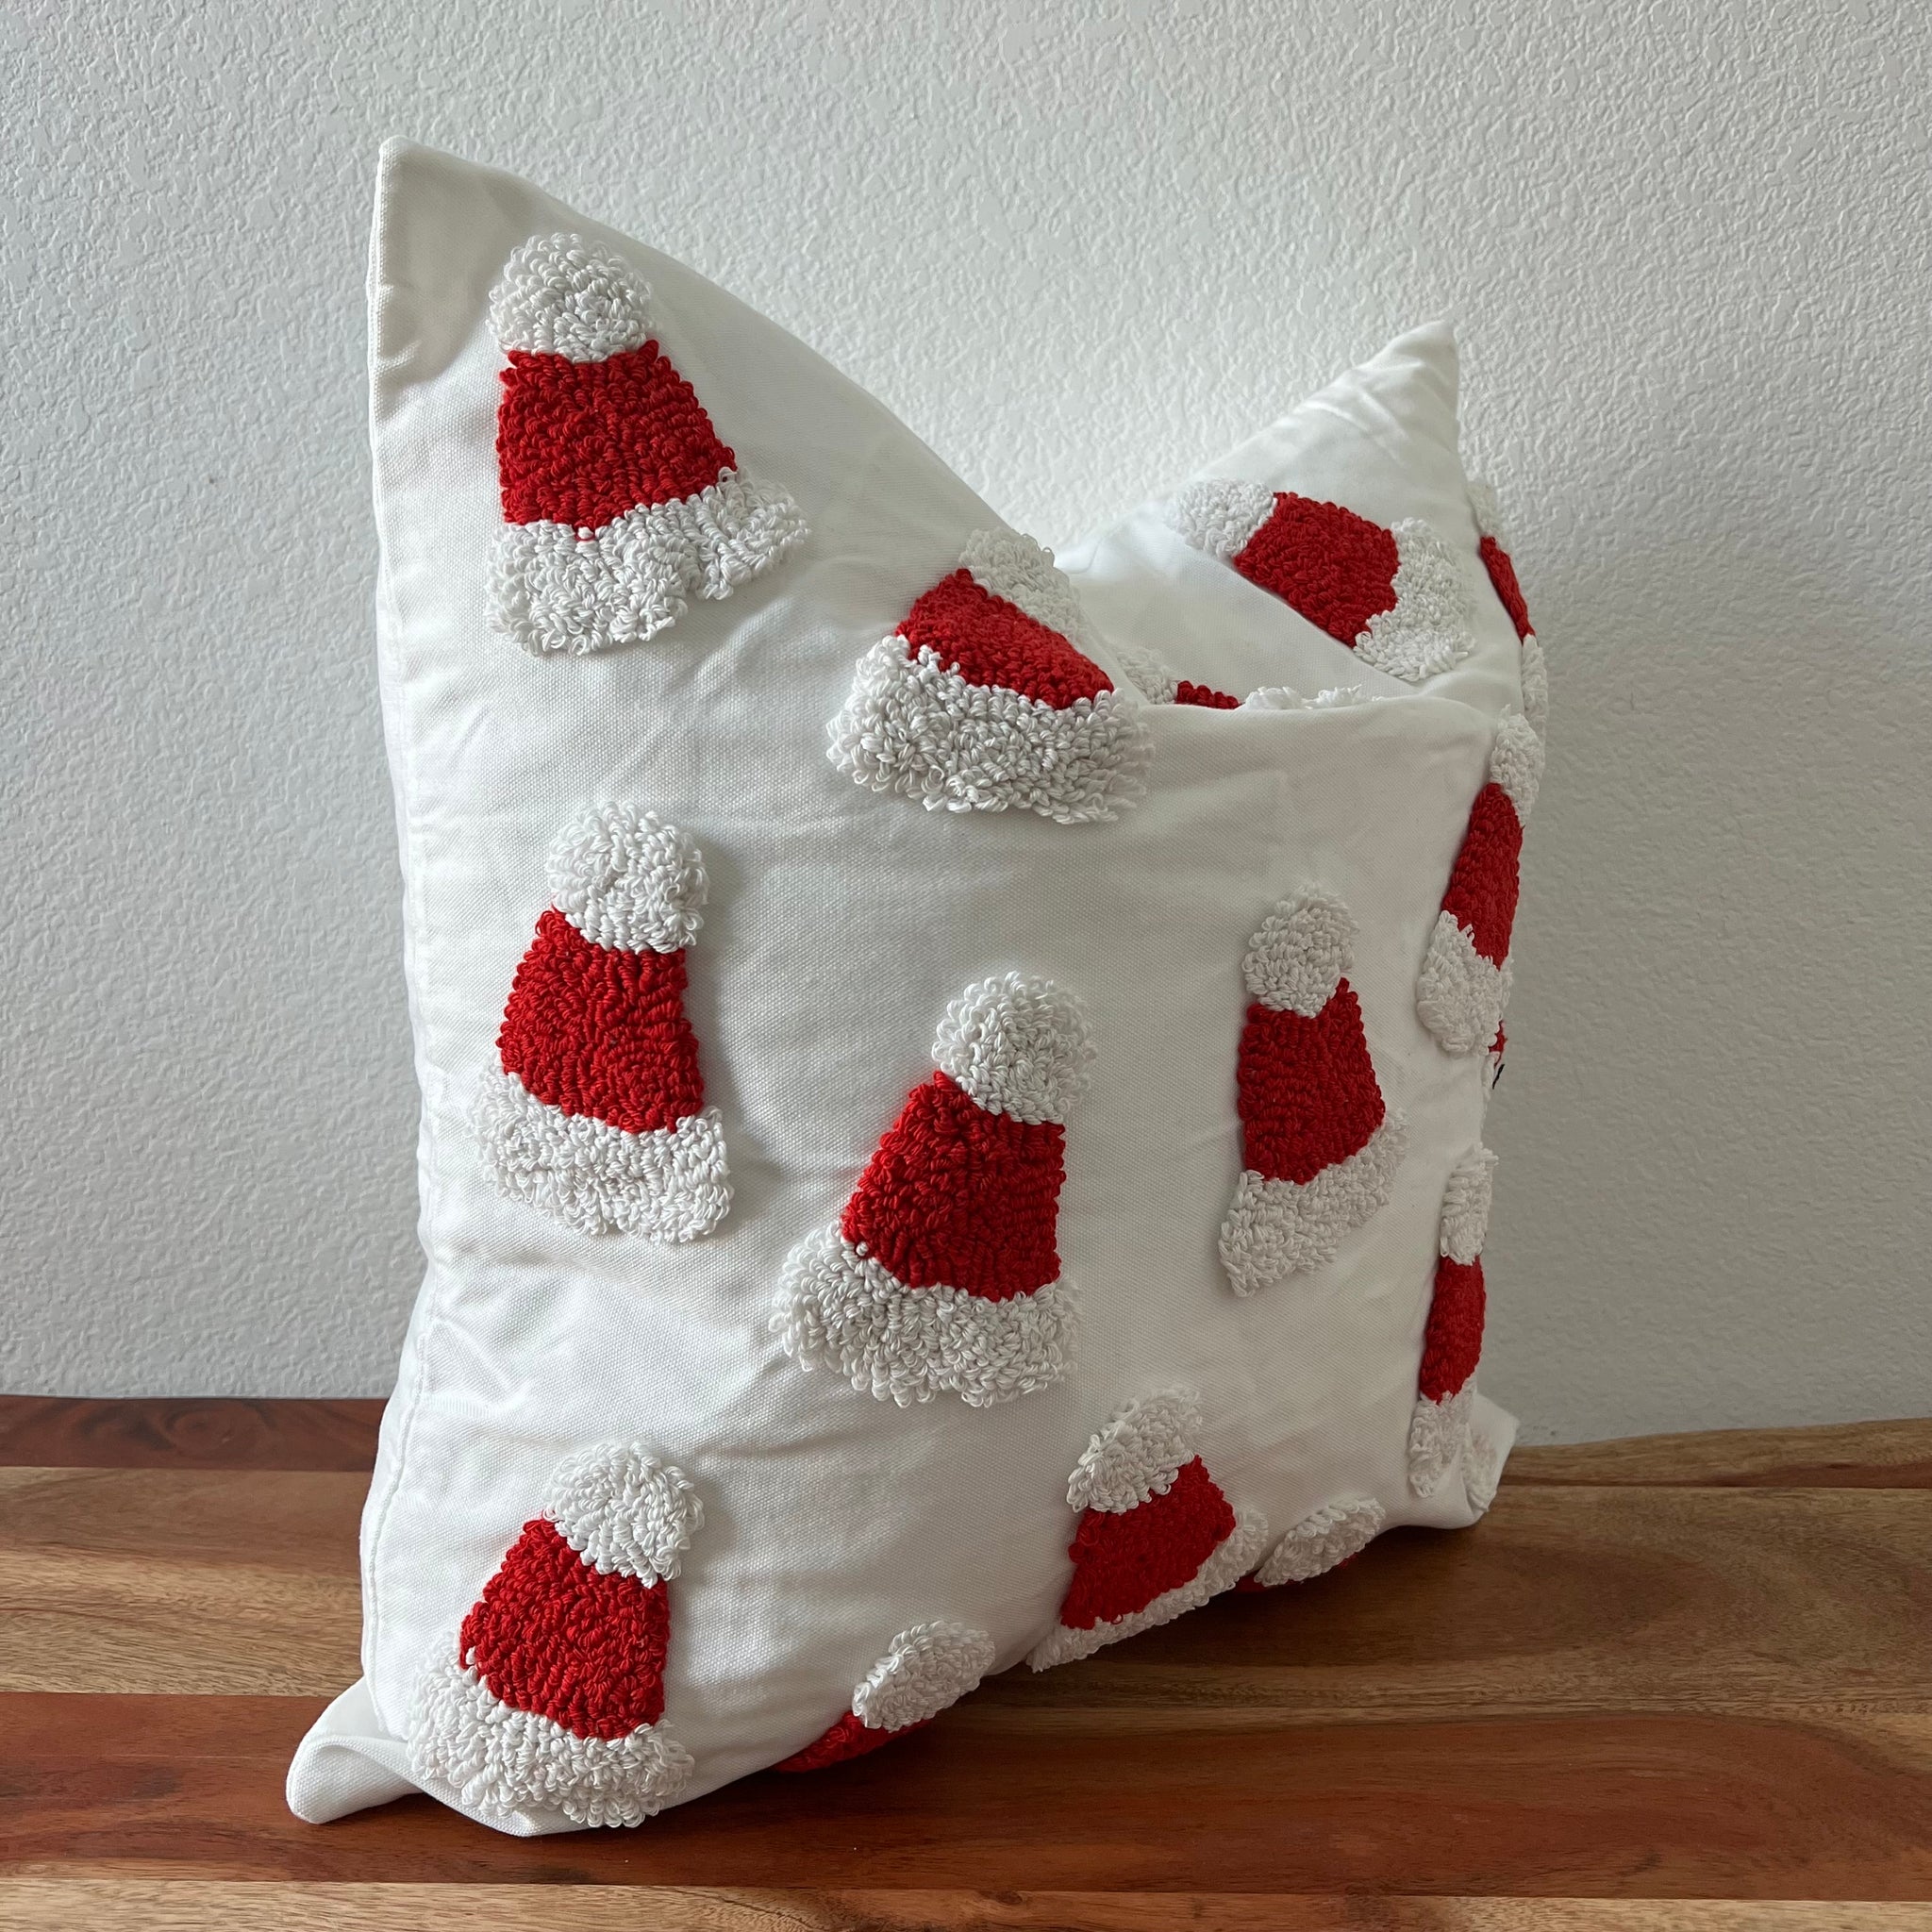 Hand Tufted Christmas Pillow Cover,embroidered Santa Cushion Cover